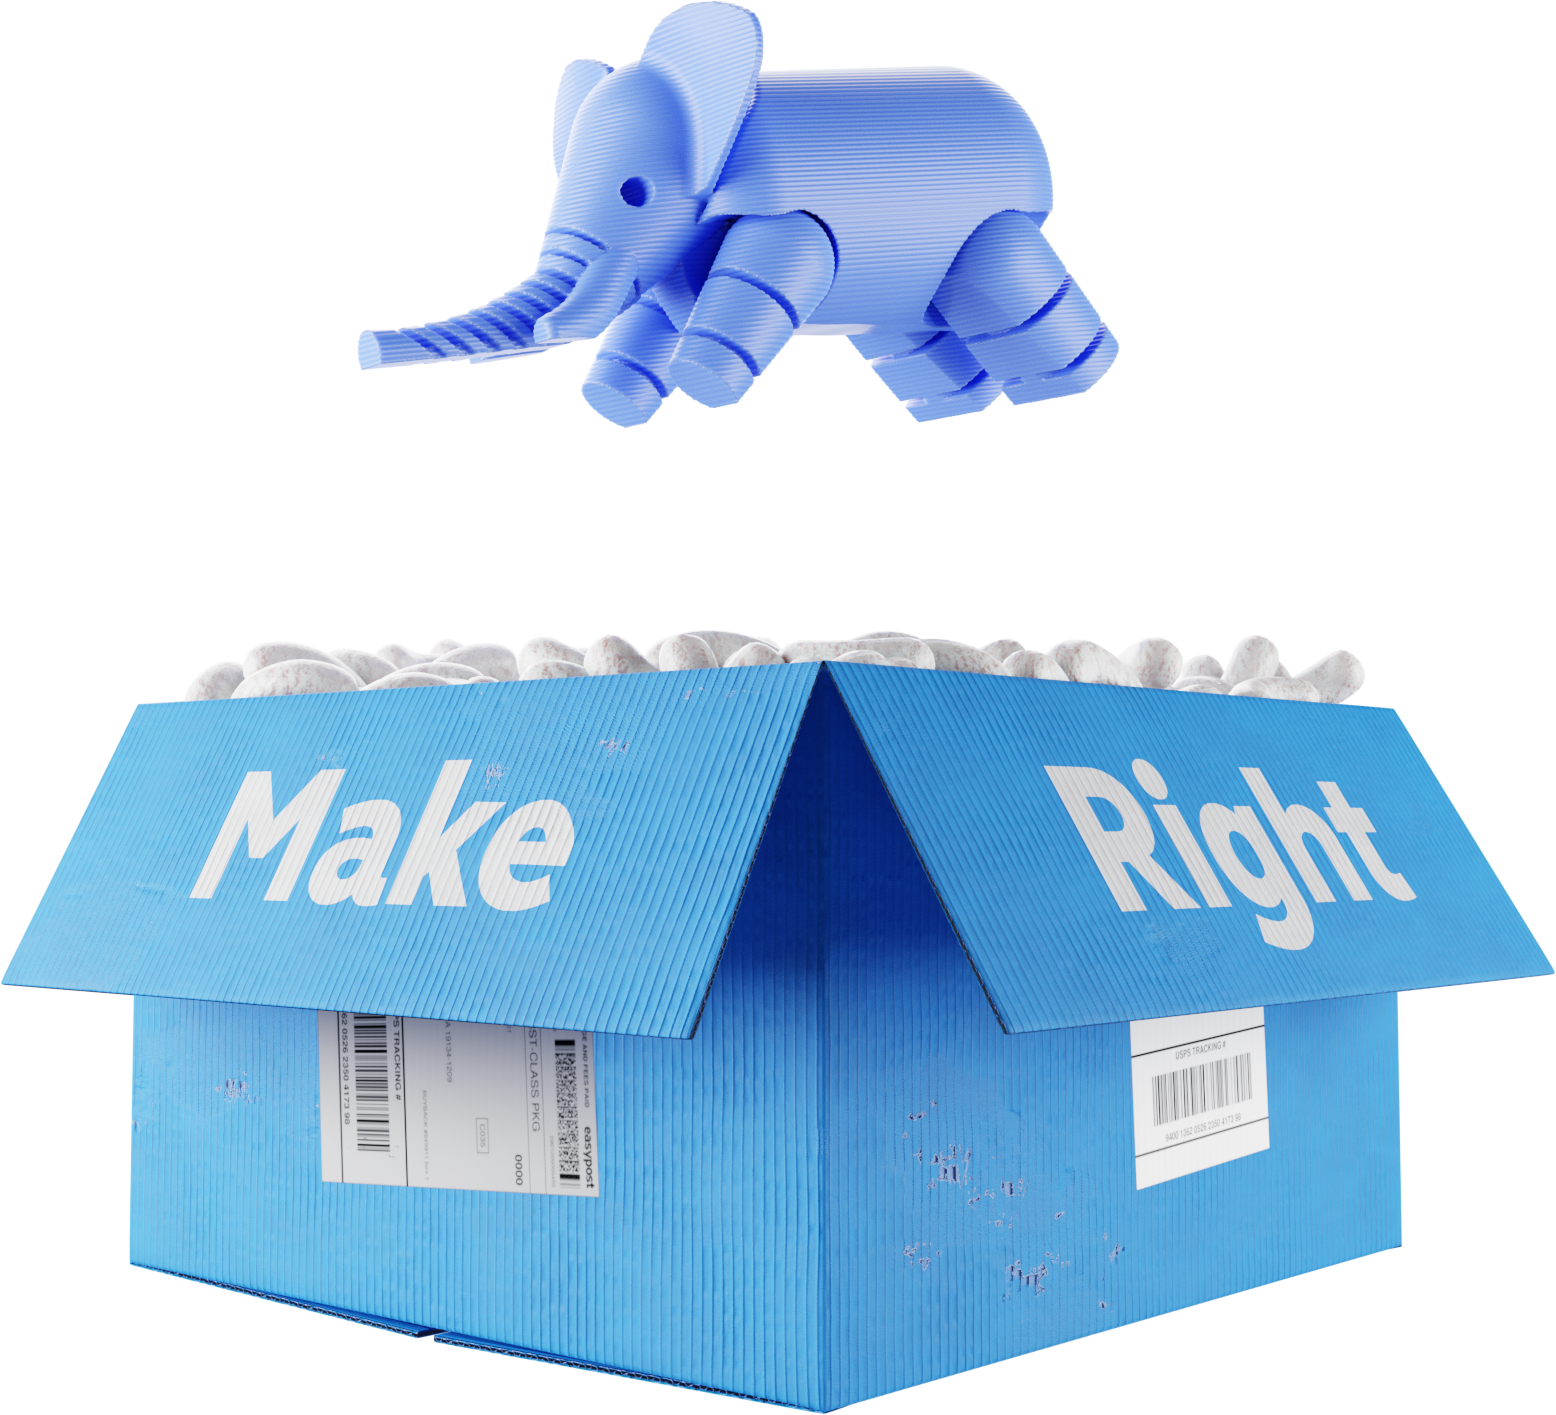 3D printed plastic elephant diving into a cardboard box